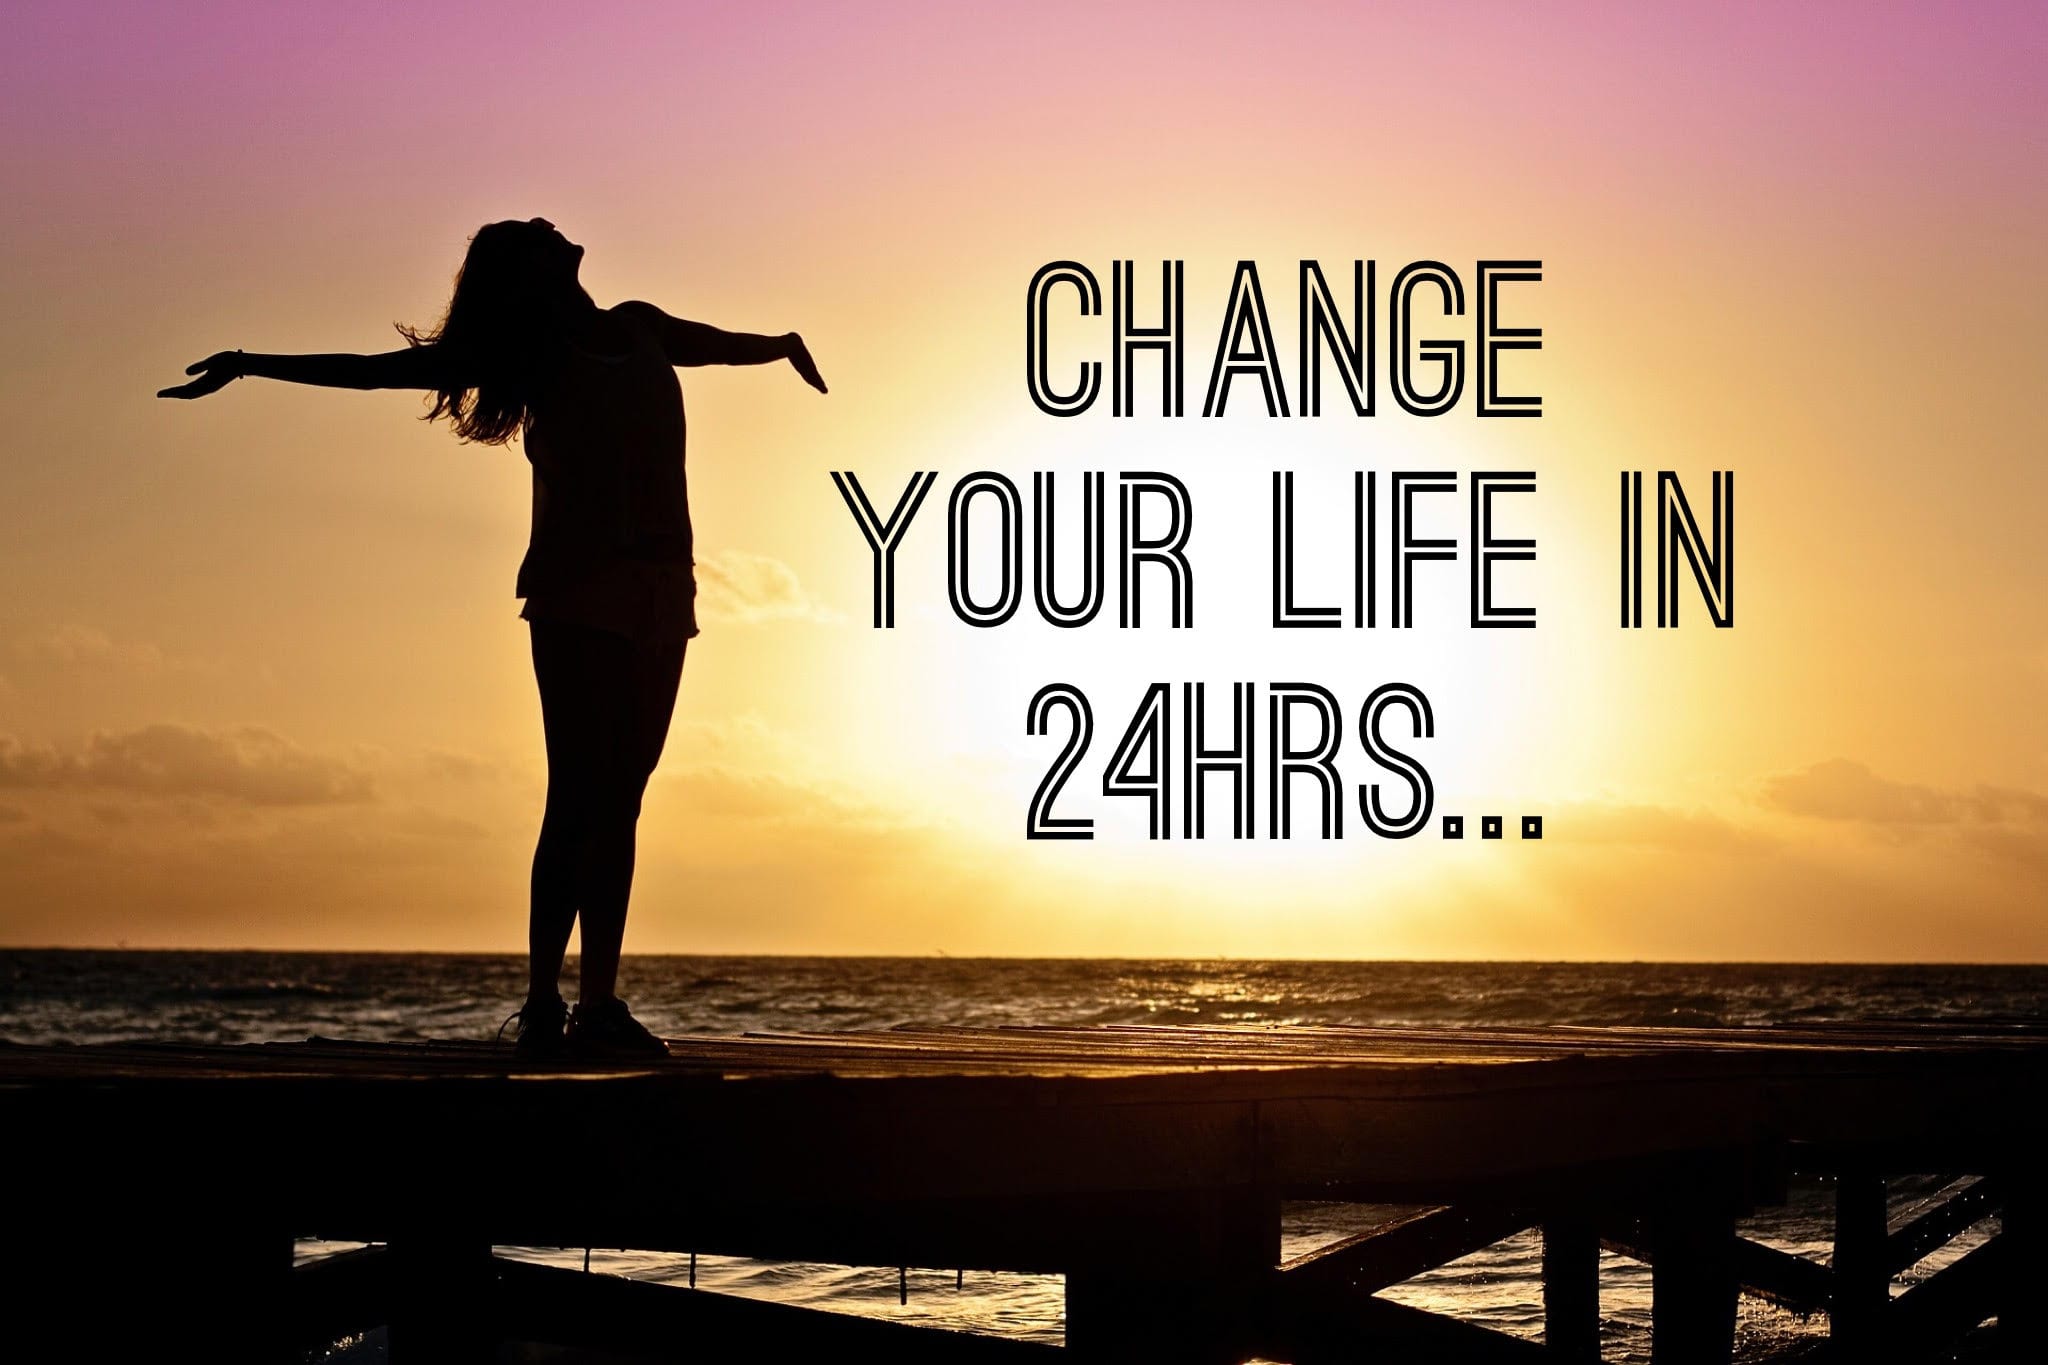 Change Your Life In 24hrs...